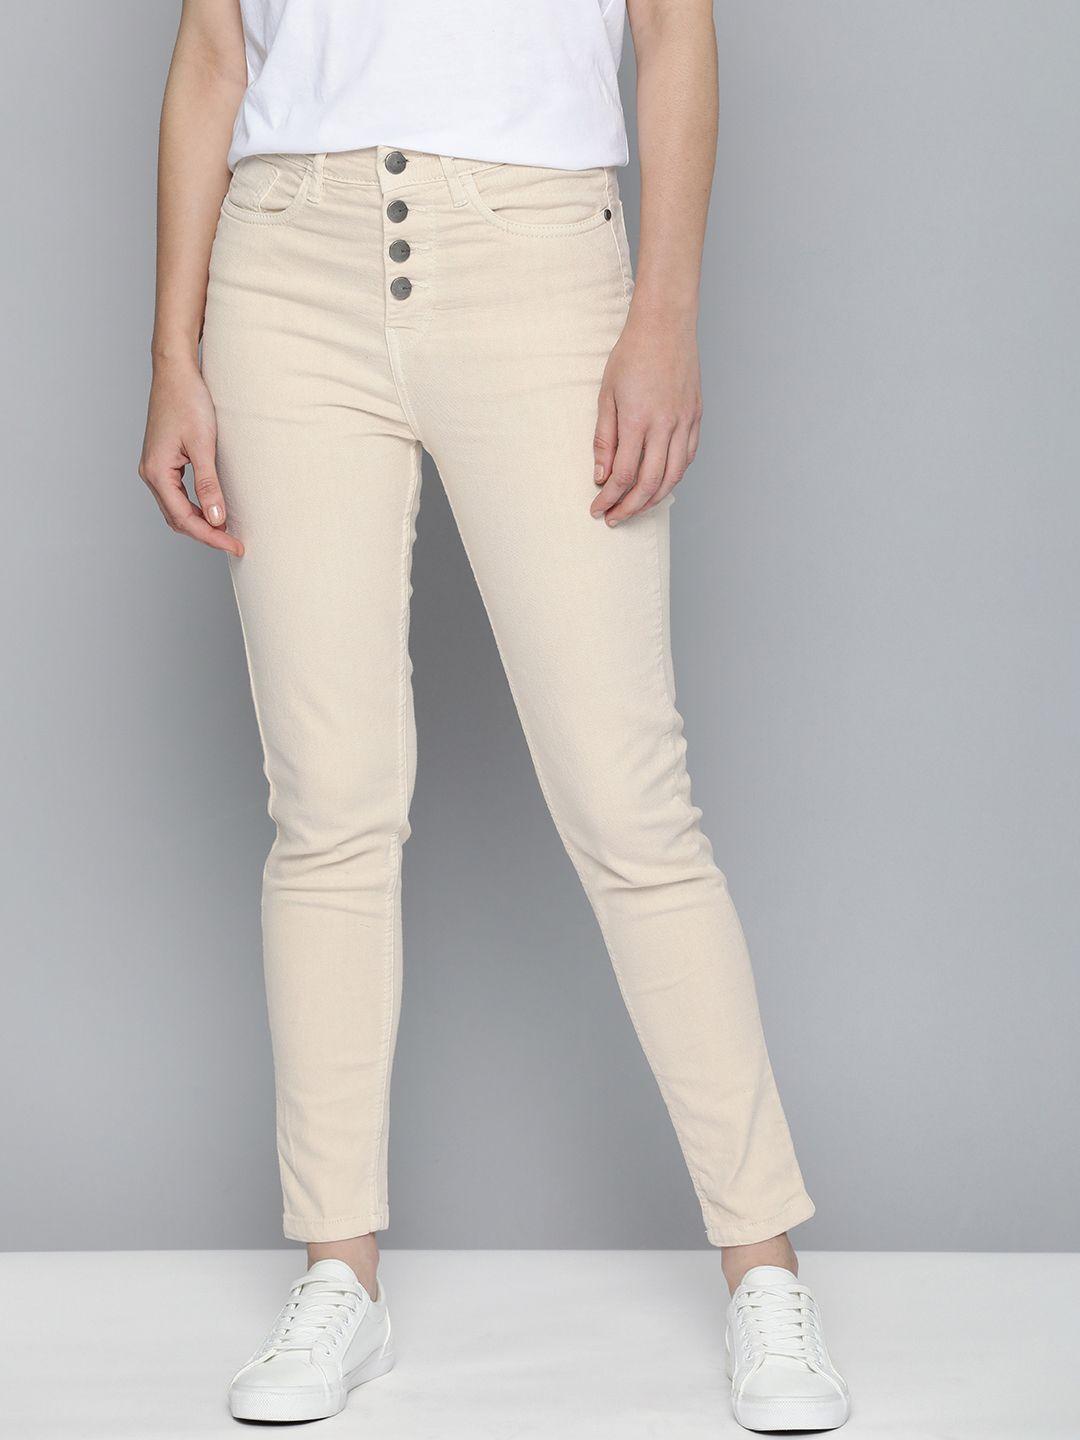 mast & harbour women off-white skinny fit mid-rise stretchable jeans